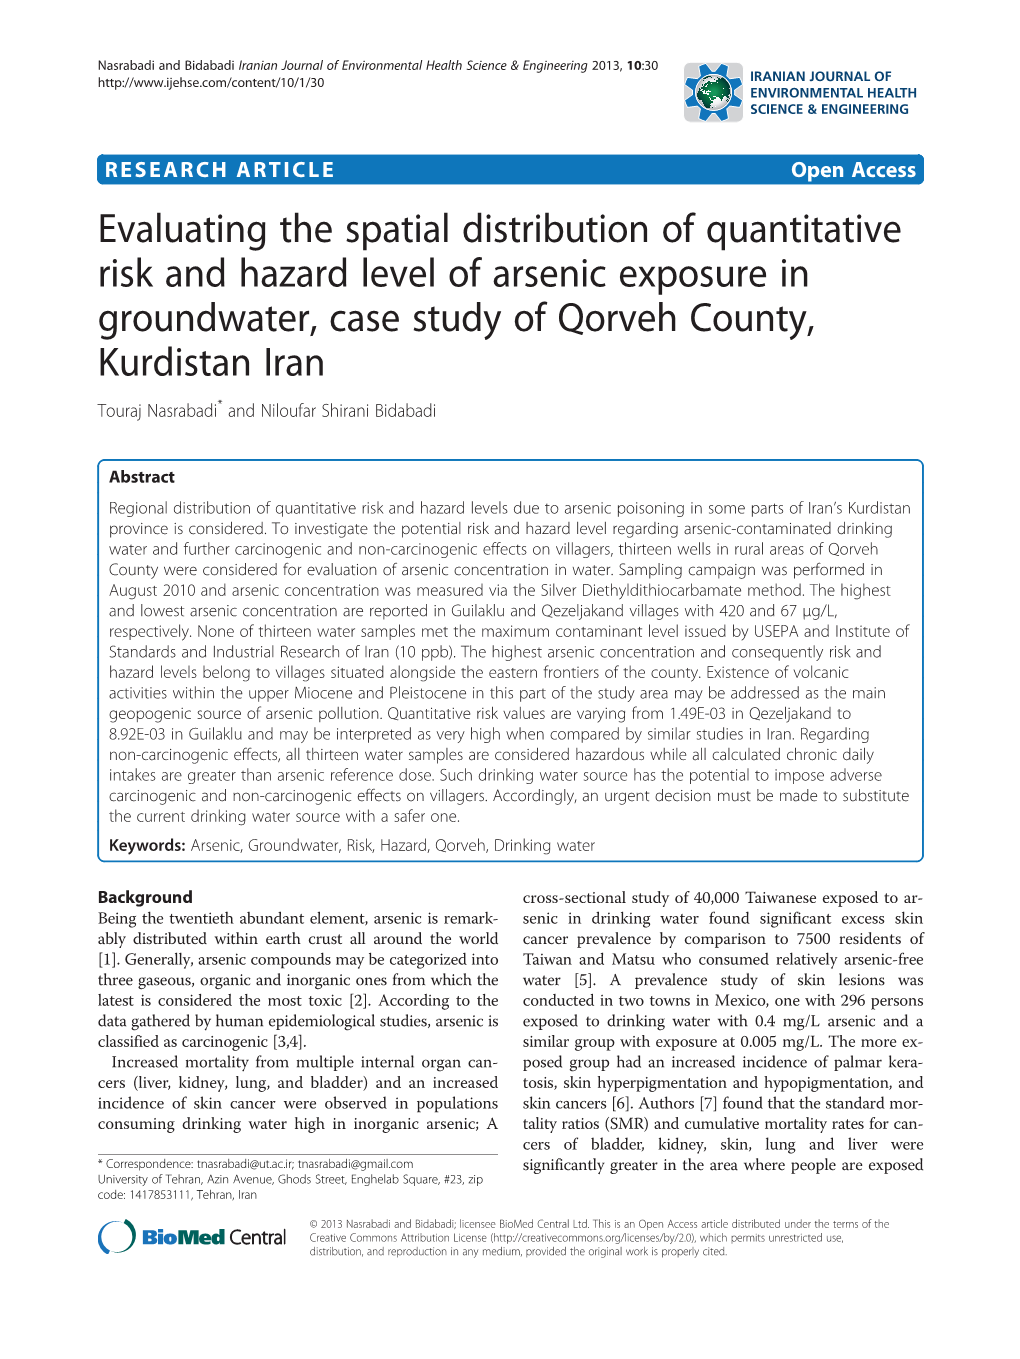 Evaluating the Spatial Distribution of Quantitative Risk and Hazard Level Of